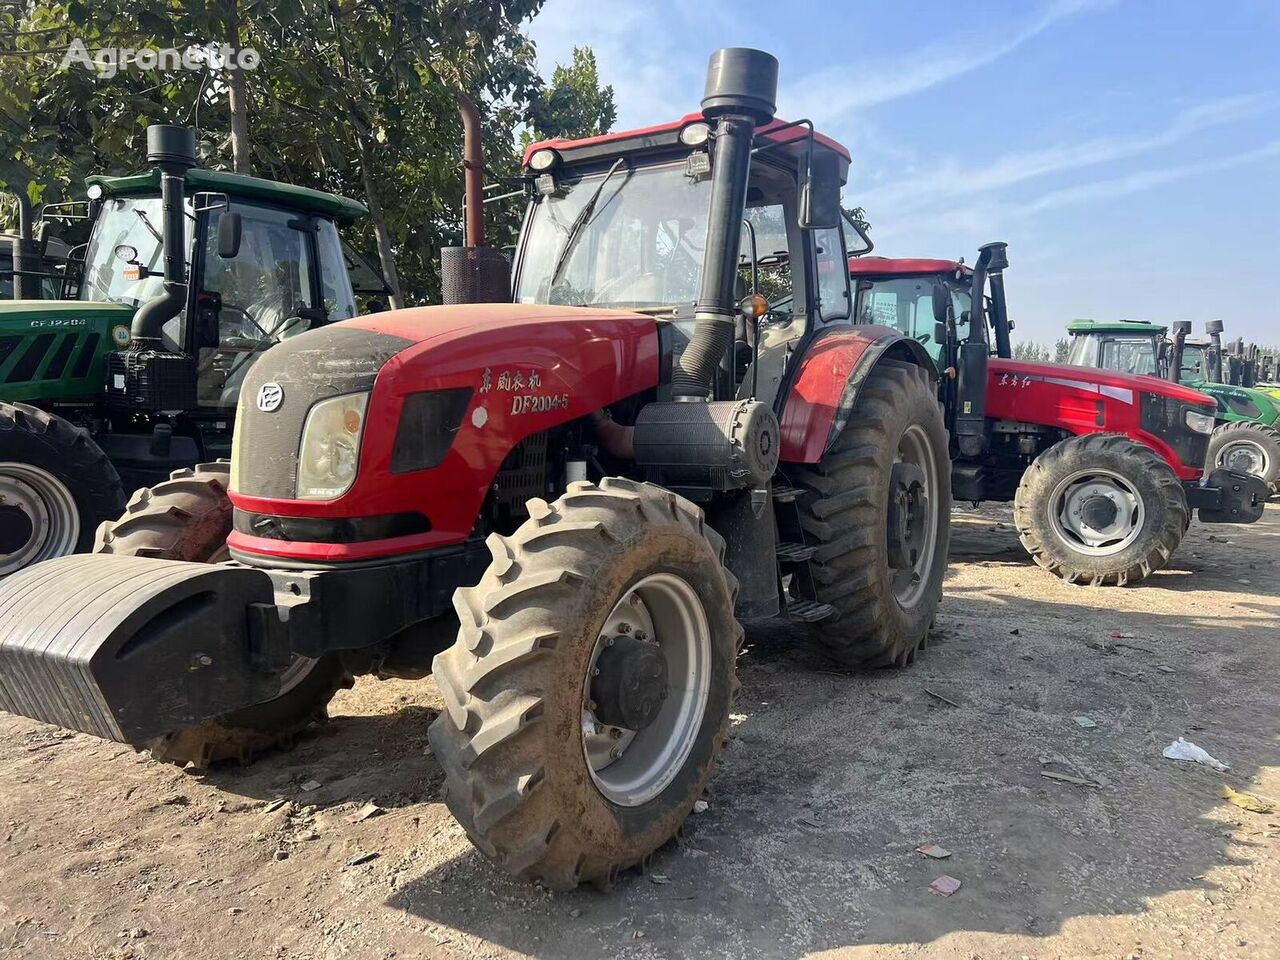 Dongfeng DF2004-5 wheel tractor